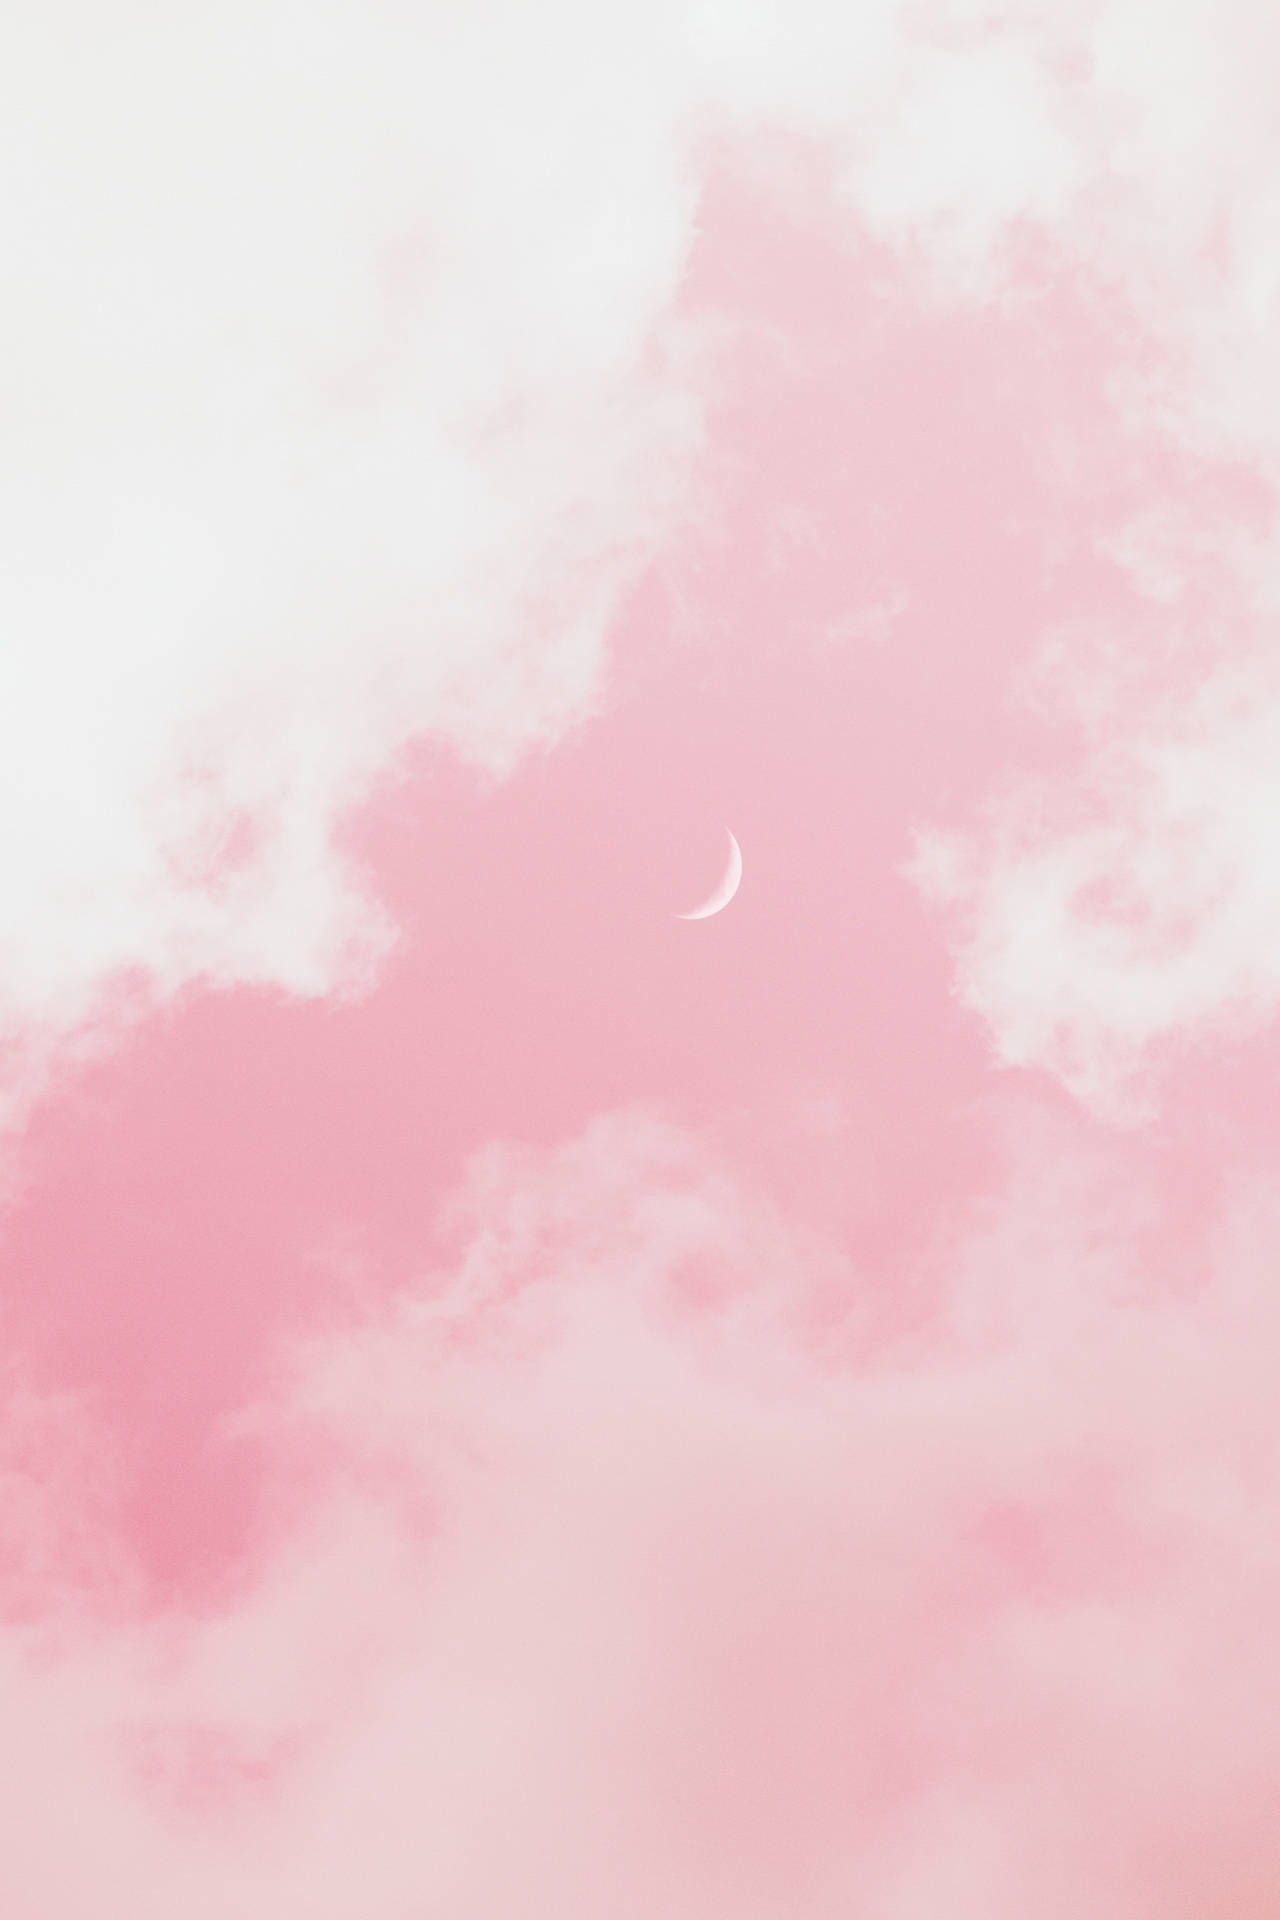 Pink Aesthetic 1888X2832 Wallpaper and Background Image